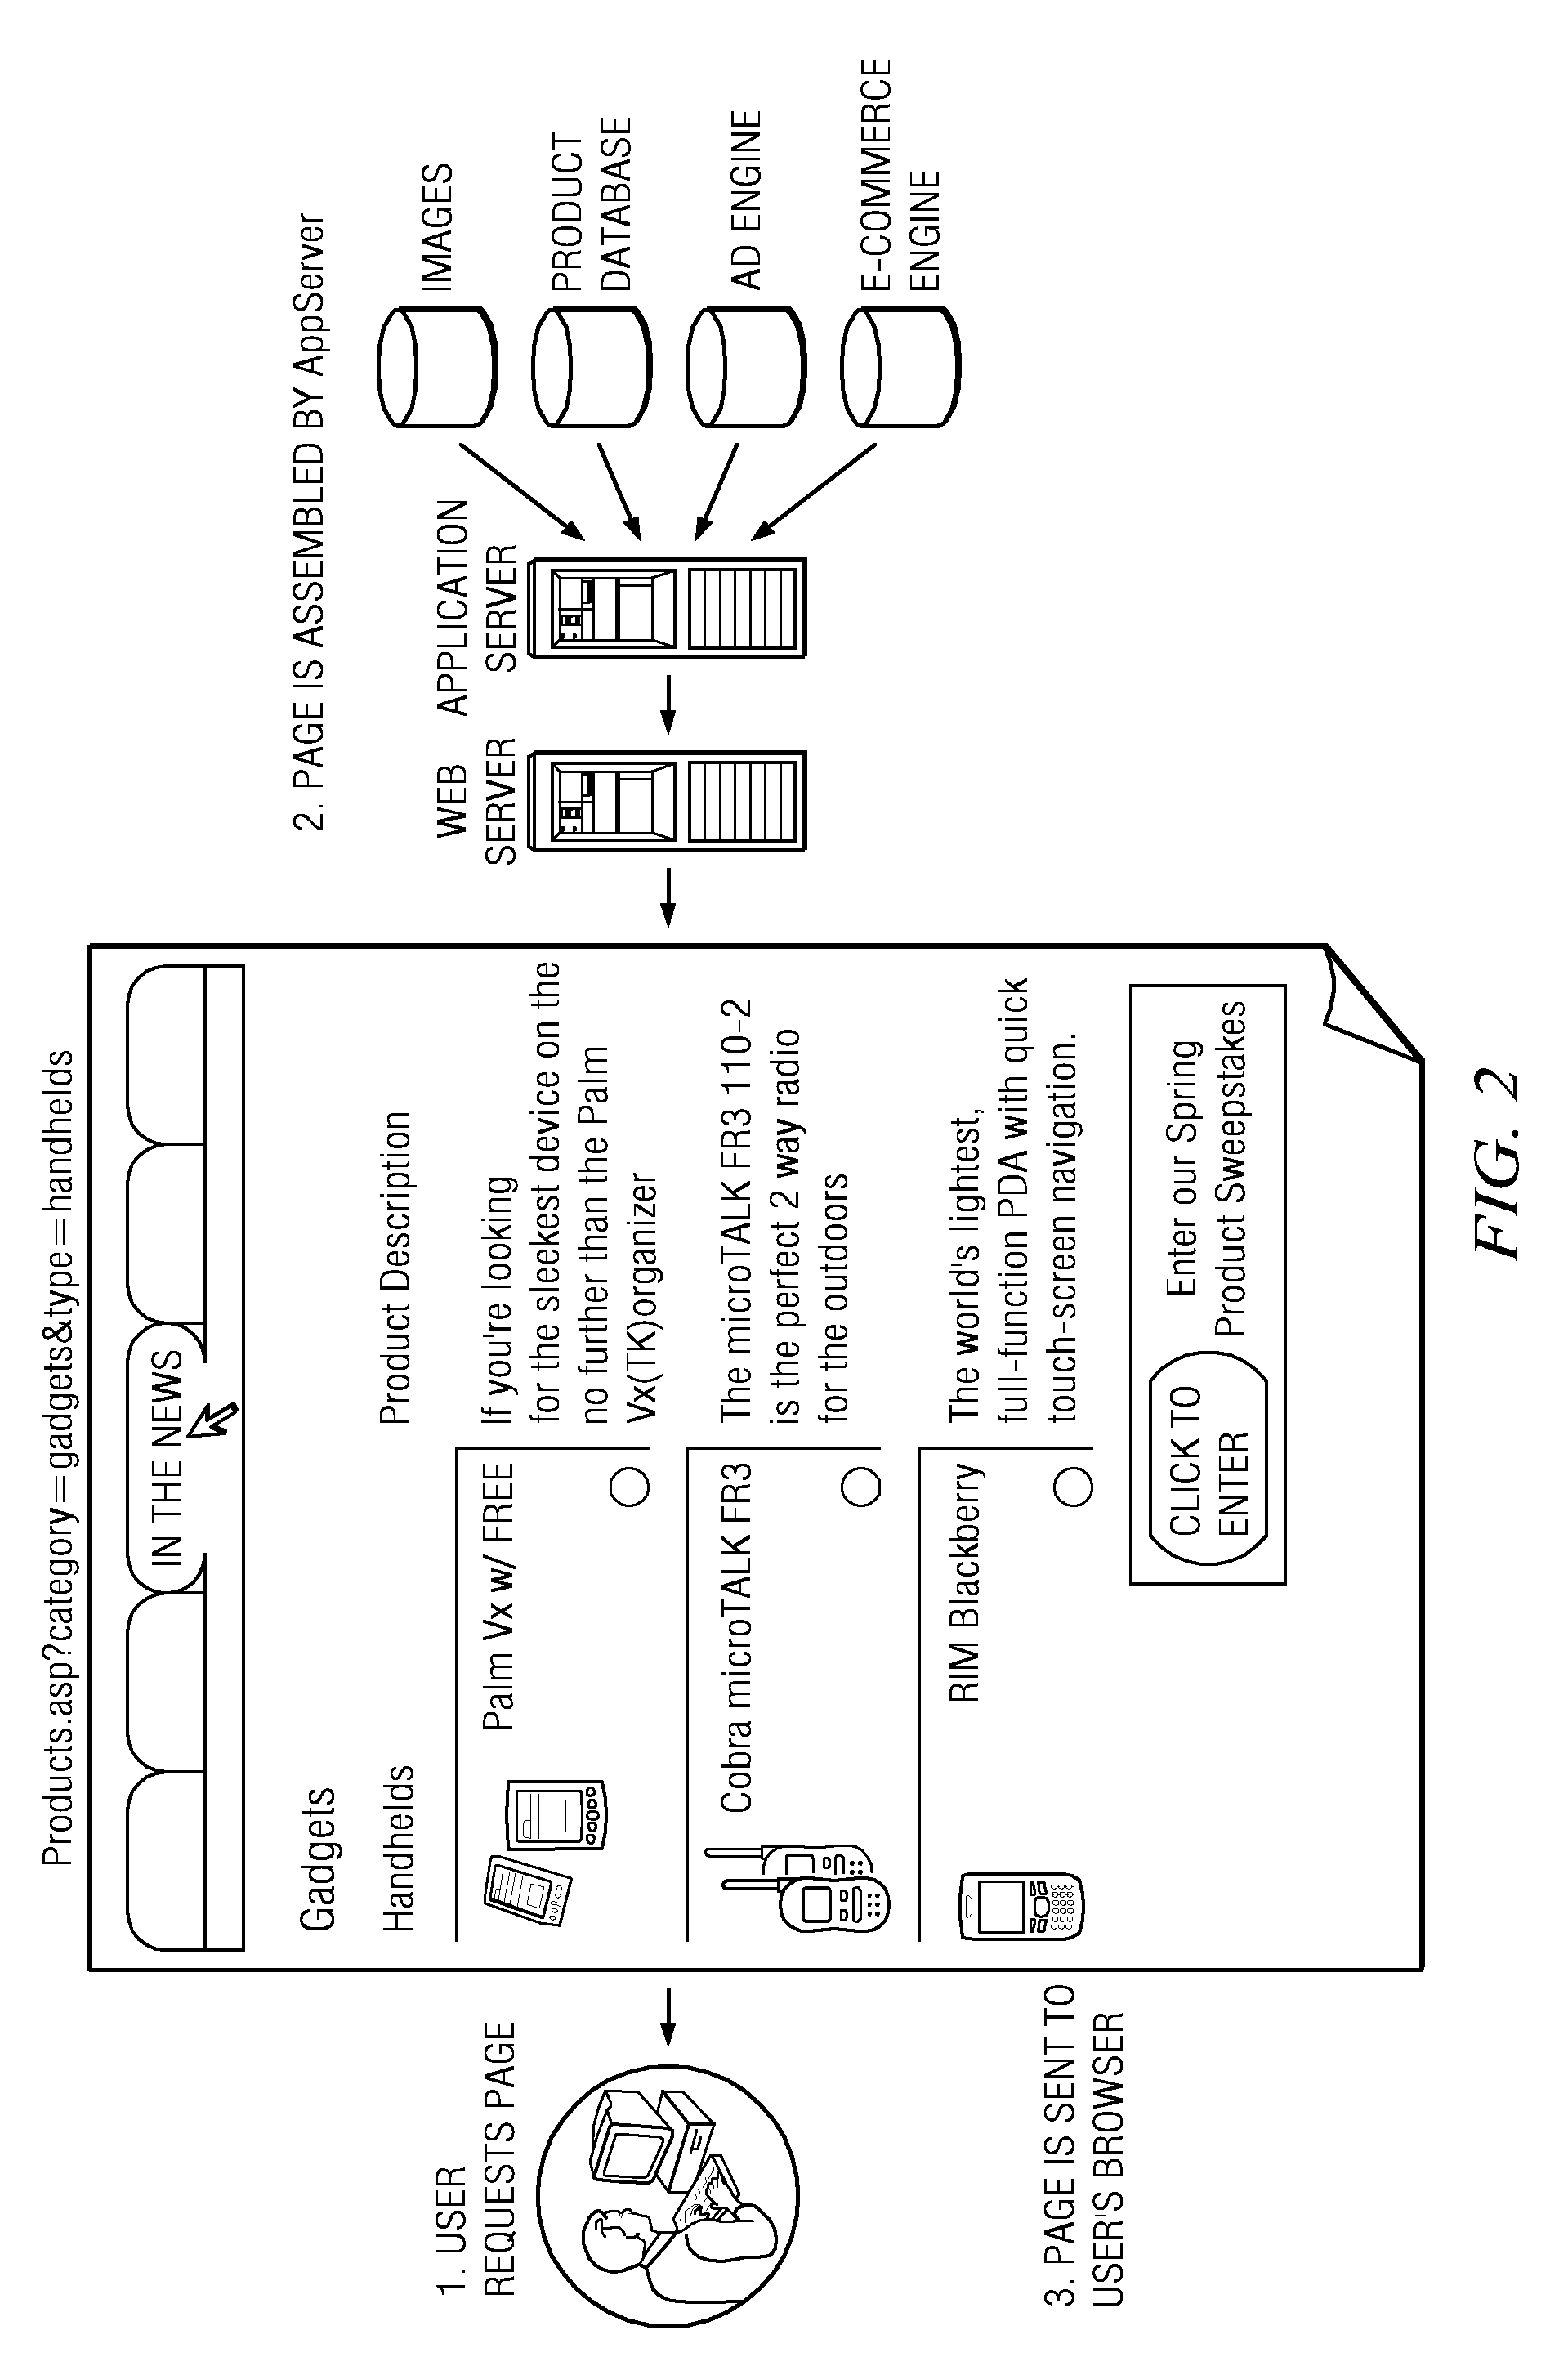 Dynamic content assembly on edge-of-network servers in a content delivery network